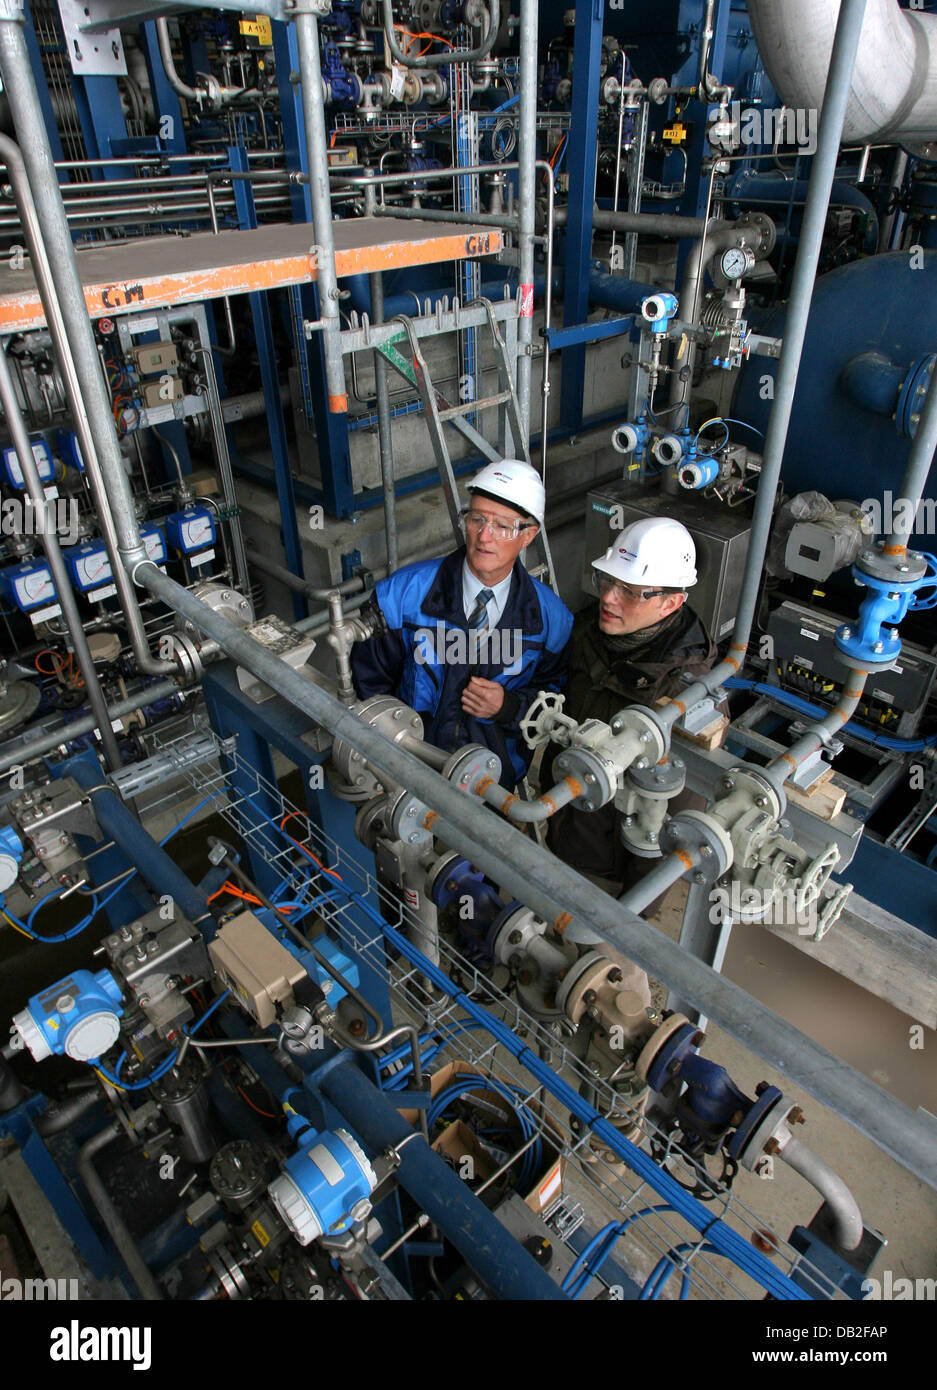 Technologists Christian Schmidt (L) and Anton Althapp check the valve control system at the first commercial next-generation-biofuel production plant under construction at CHOREN Industries GmbH Freiberg, Germany, 17 December 2007. From 2008 on, up to 18 million litres of Biomass To Liquids (BTL) biofuel will be gained from wood and plant waste. The first large-quantity BTL plant m Stock Photo